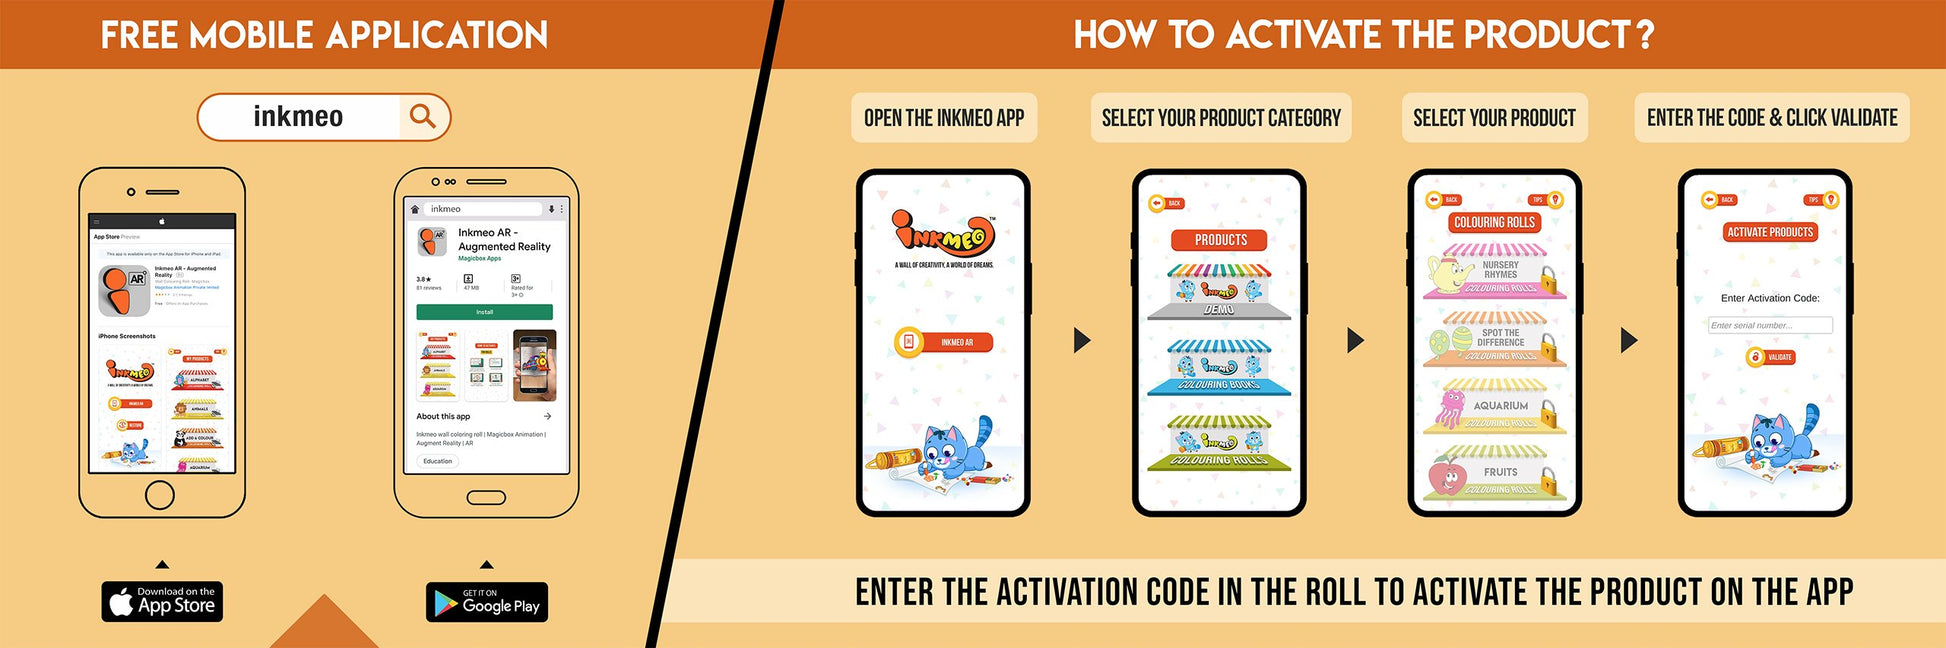 The image features an orange background split into two sections. The first showcases a free mobile app to download Inkmeo from the App Store and Google Store. The second displays four phones with the text "To access the Inkmeo app, tap the QR code icon, scan the QR code on the package, and activate the product."